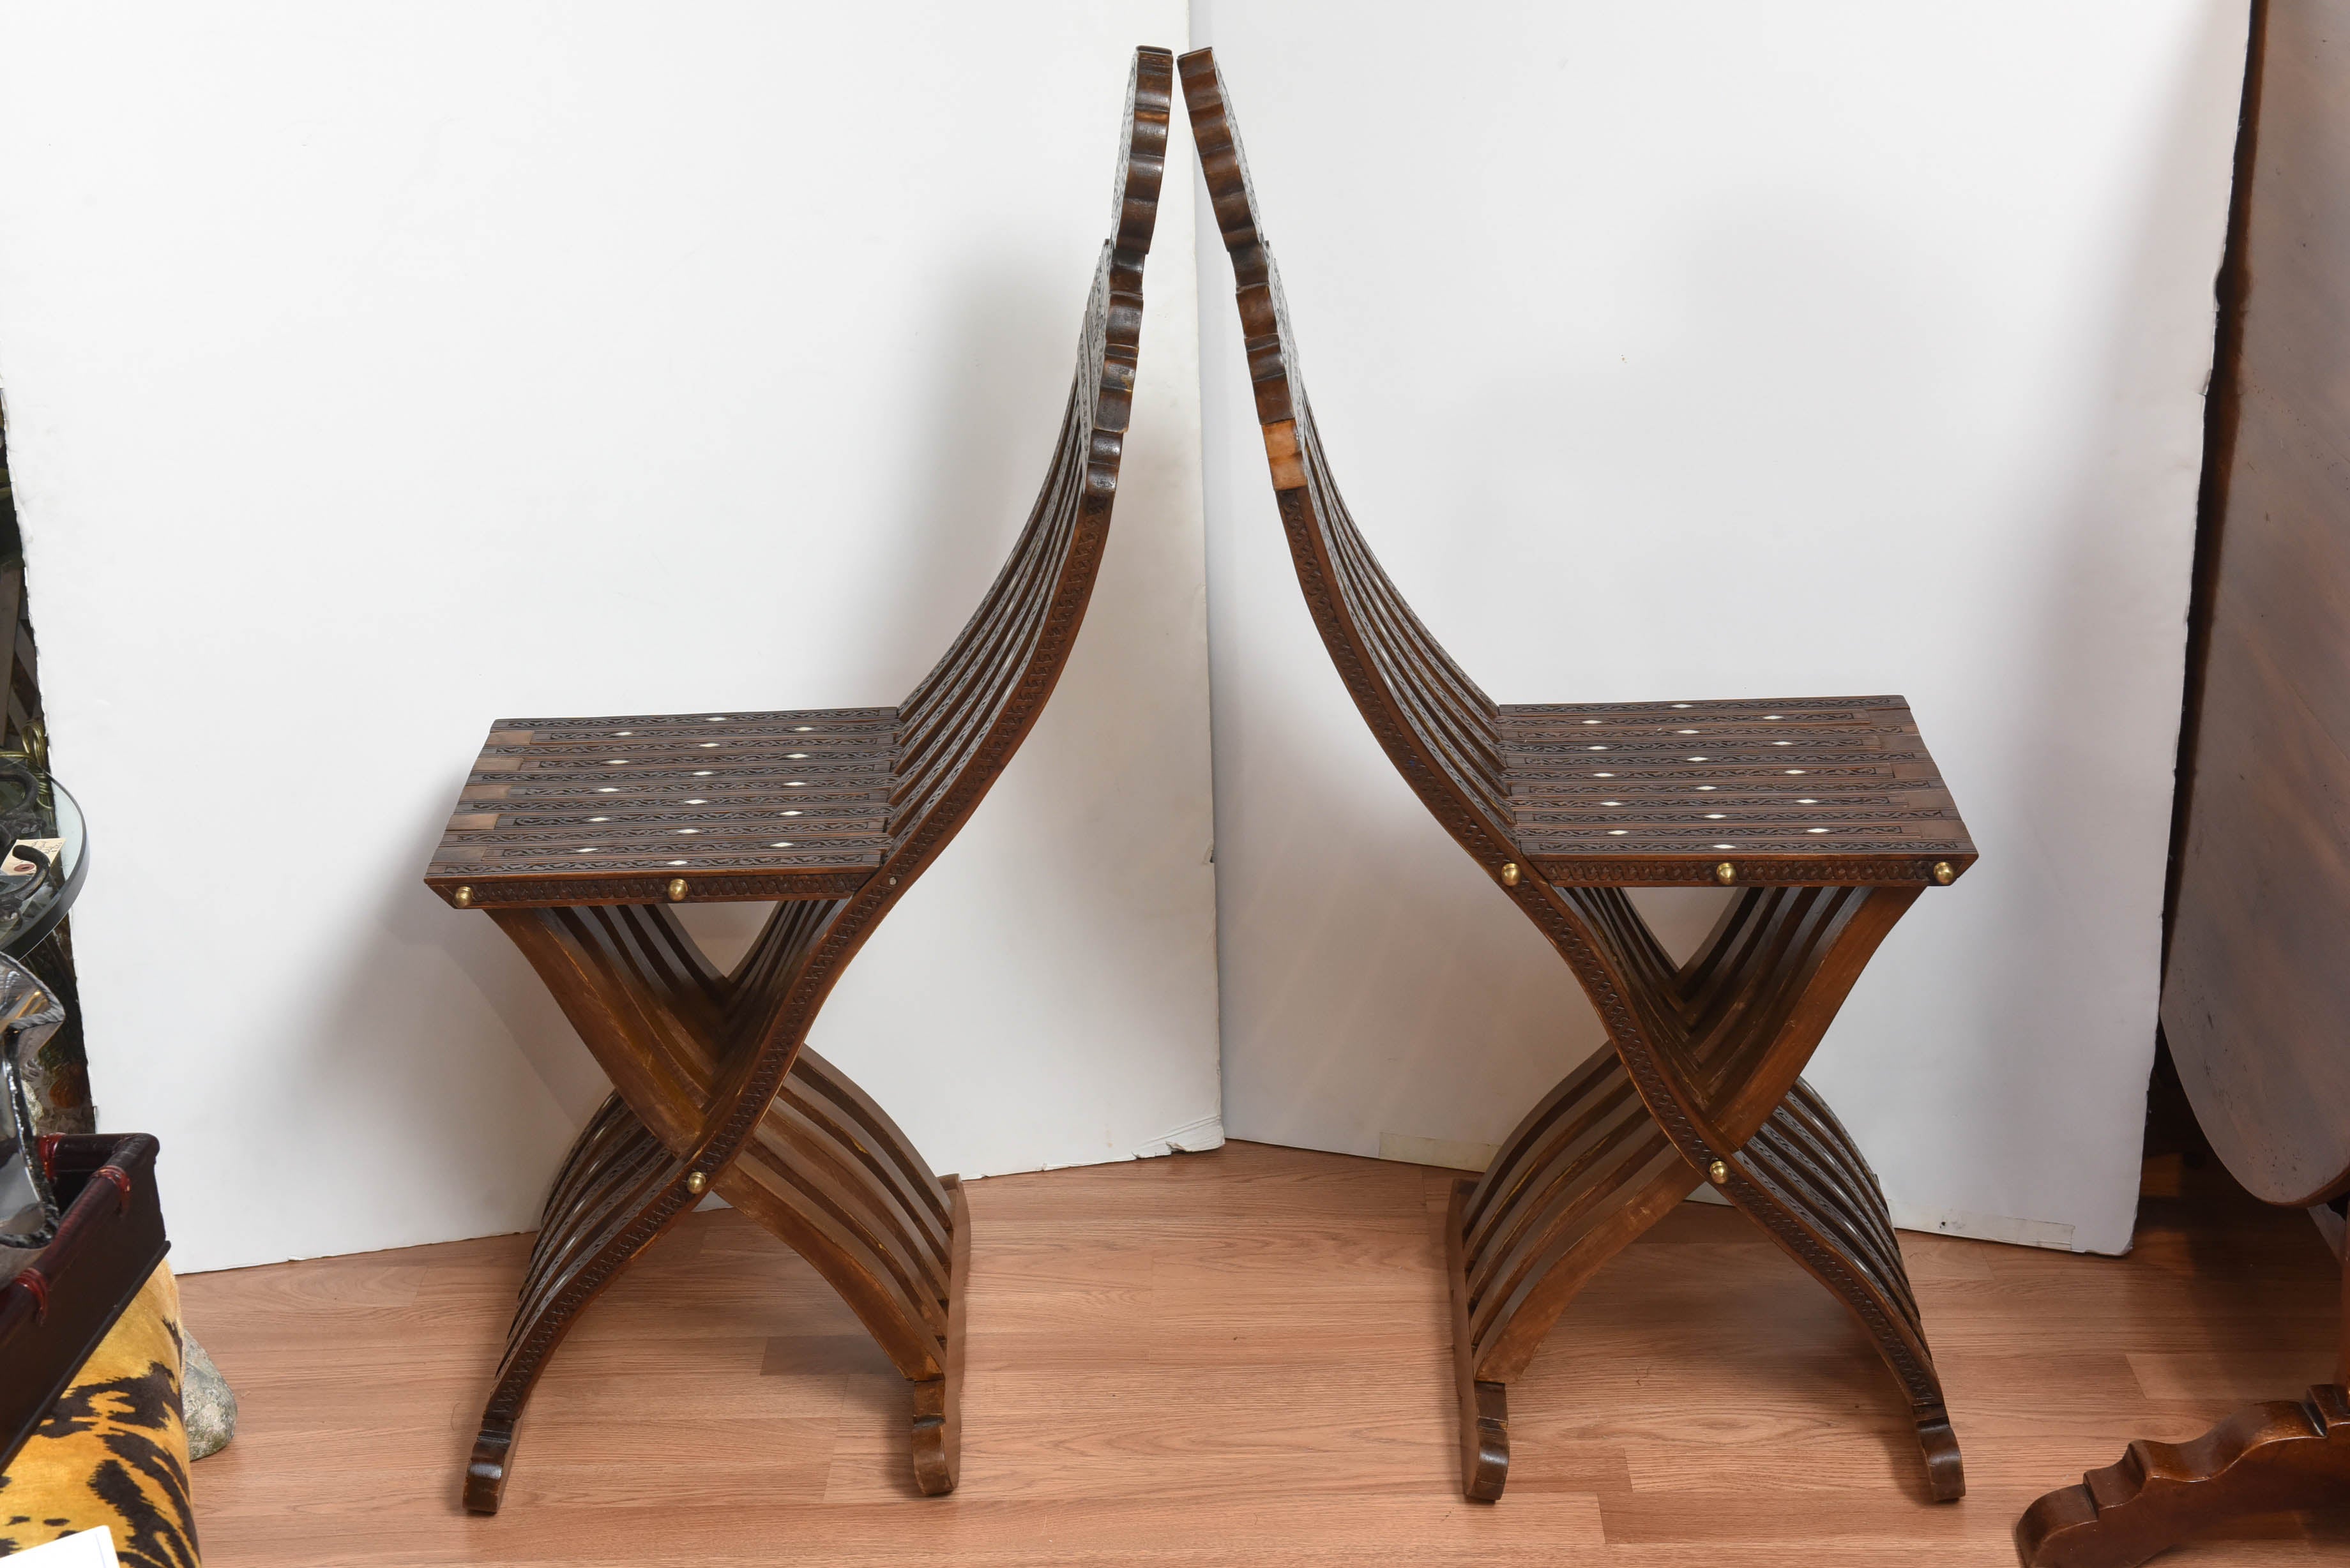 Pair of 19th Century Syrian Folding Chairs with Mother-of-Pearl Inlays 1